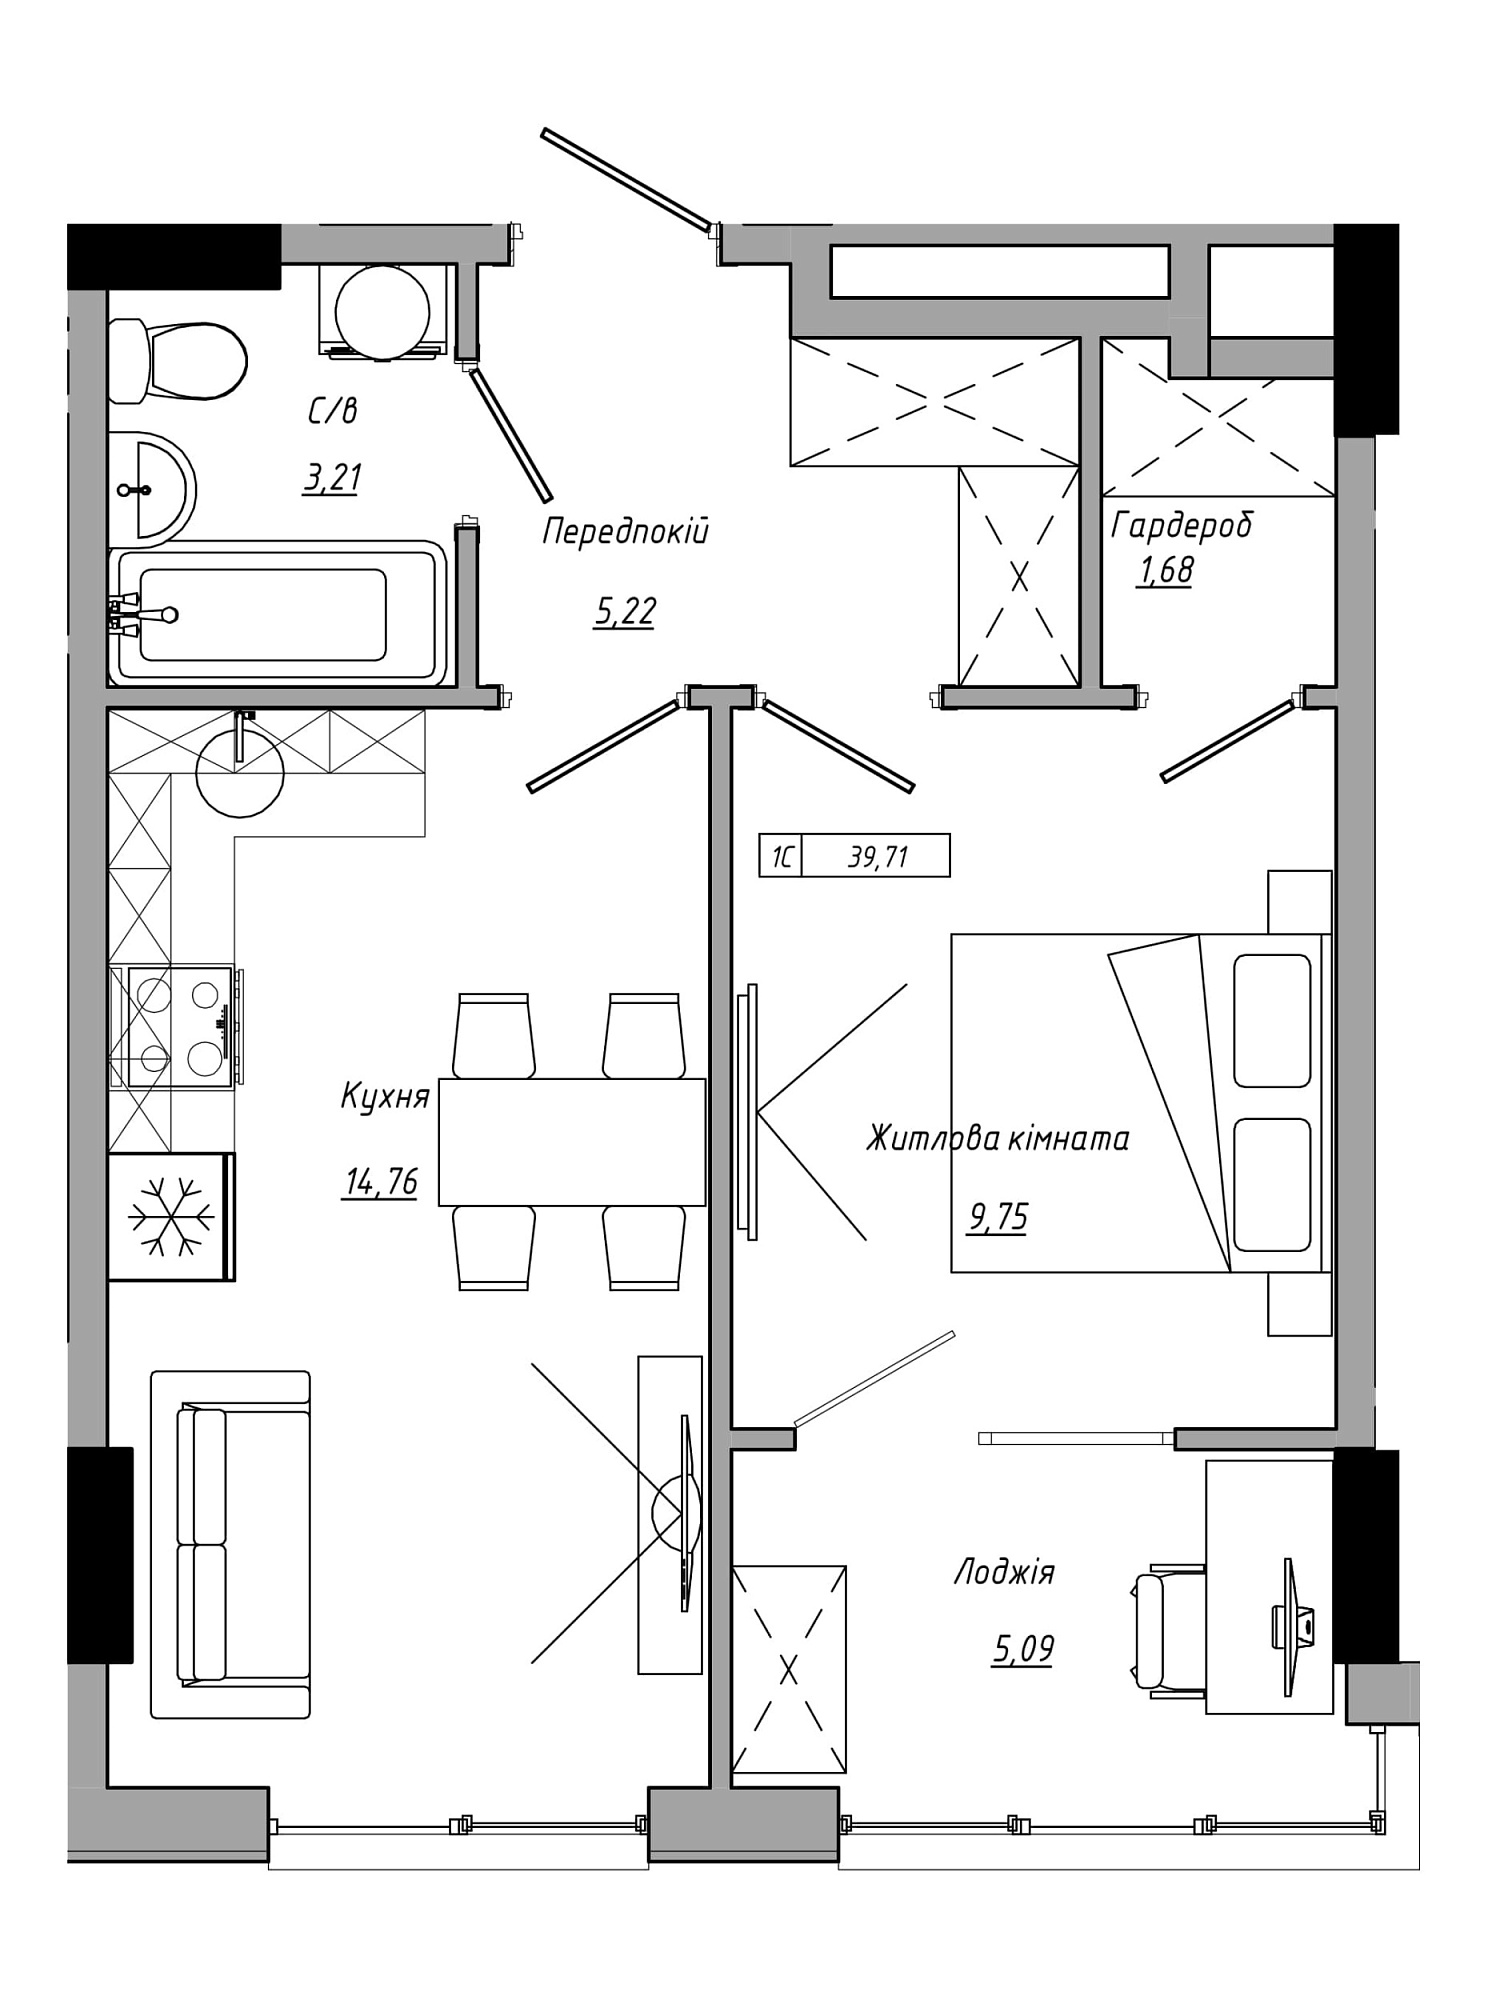 Planning 1-rm flats area 39.71m2, AB-21-05/00021.